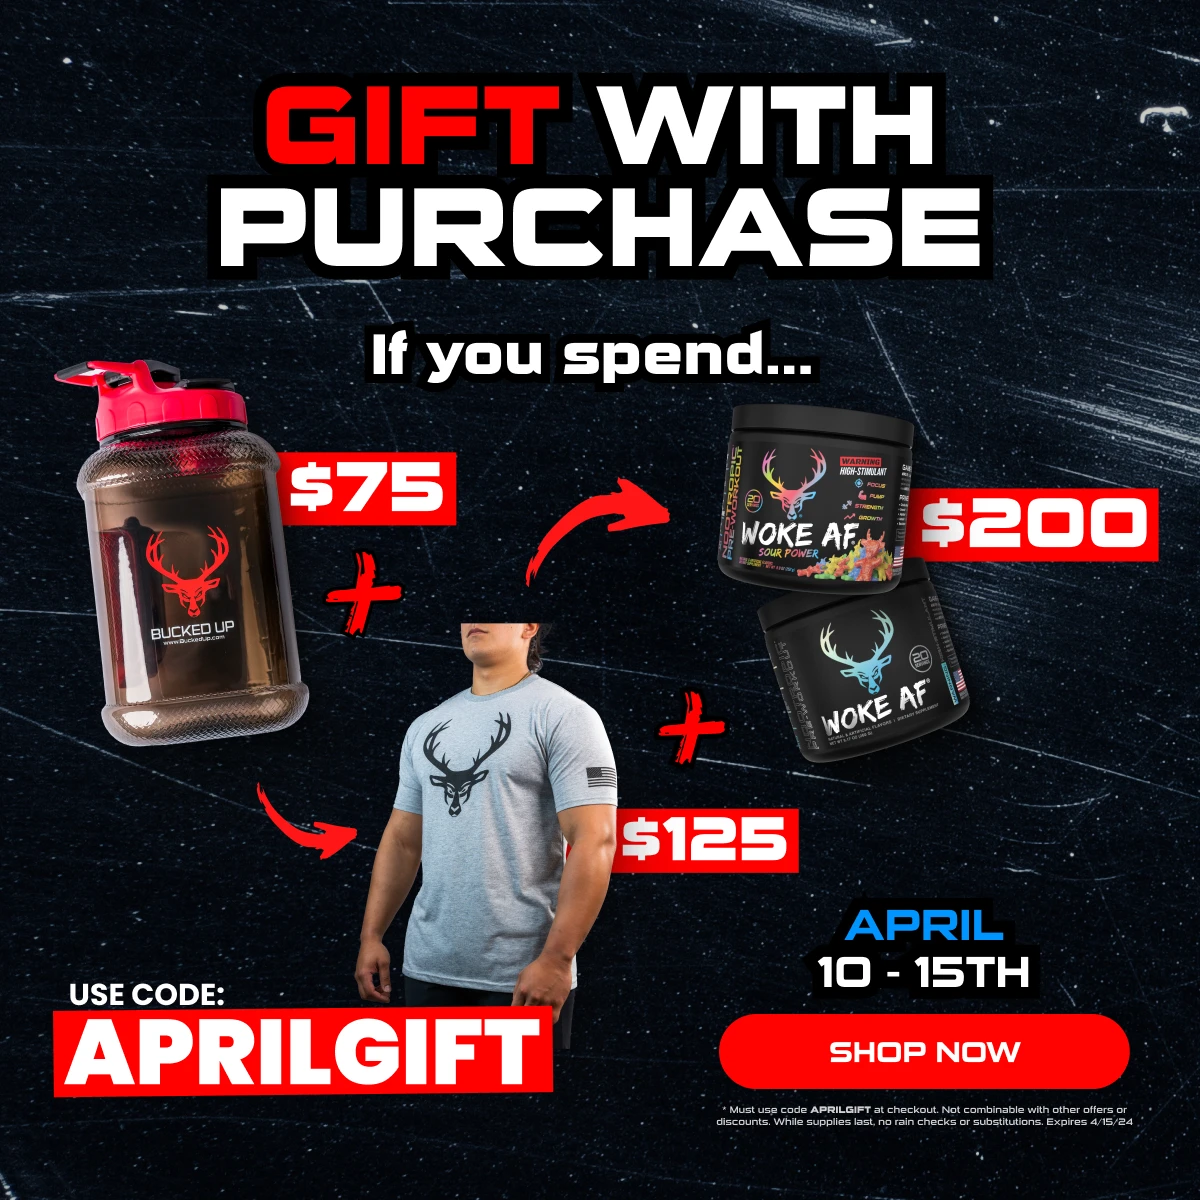 GWP - April 10-15 - Text says "gift with purchase.  If you spend $75, you get a hydranator 64 oz water bottle.  If you spend $125, you get the hydranator and a flag t-shirt.  If you spend $200, you get the hydranator, flag t-shirt, and a 20 serving w